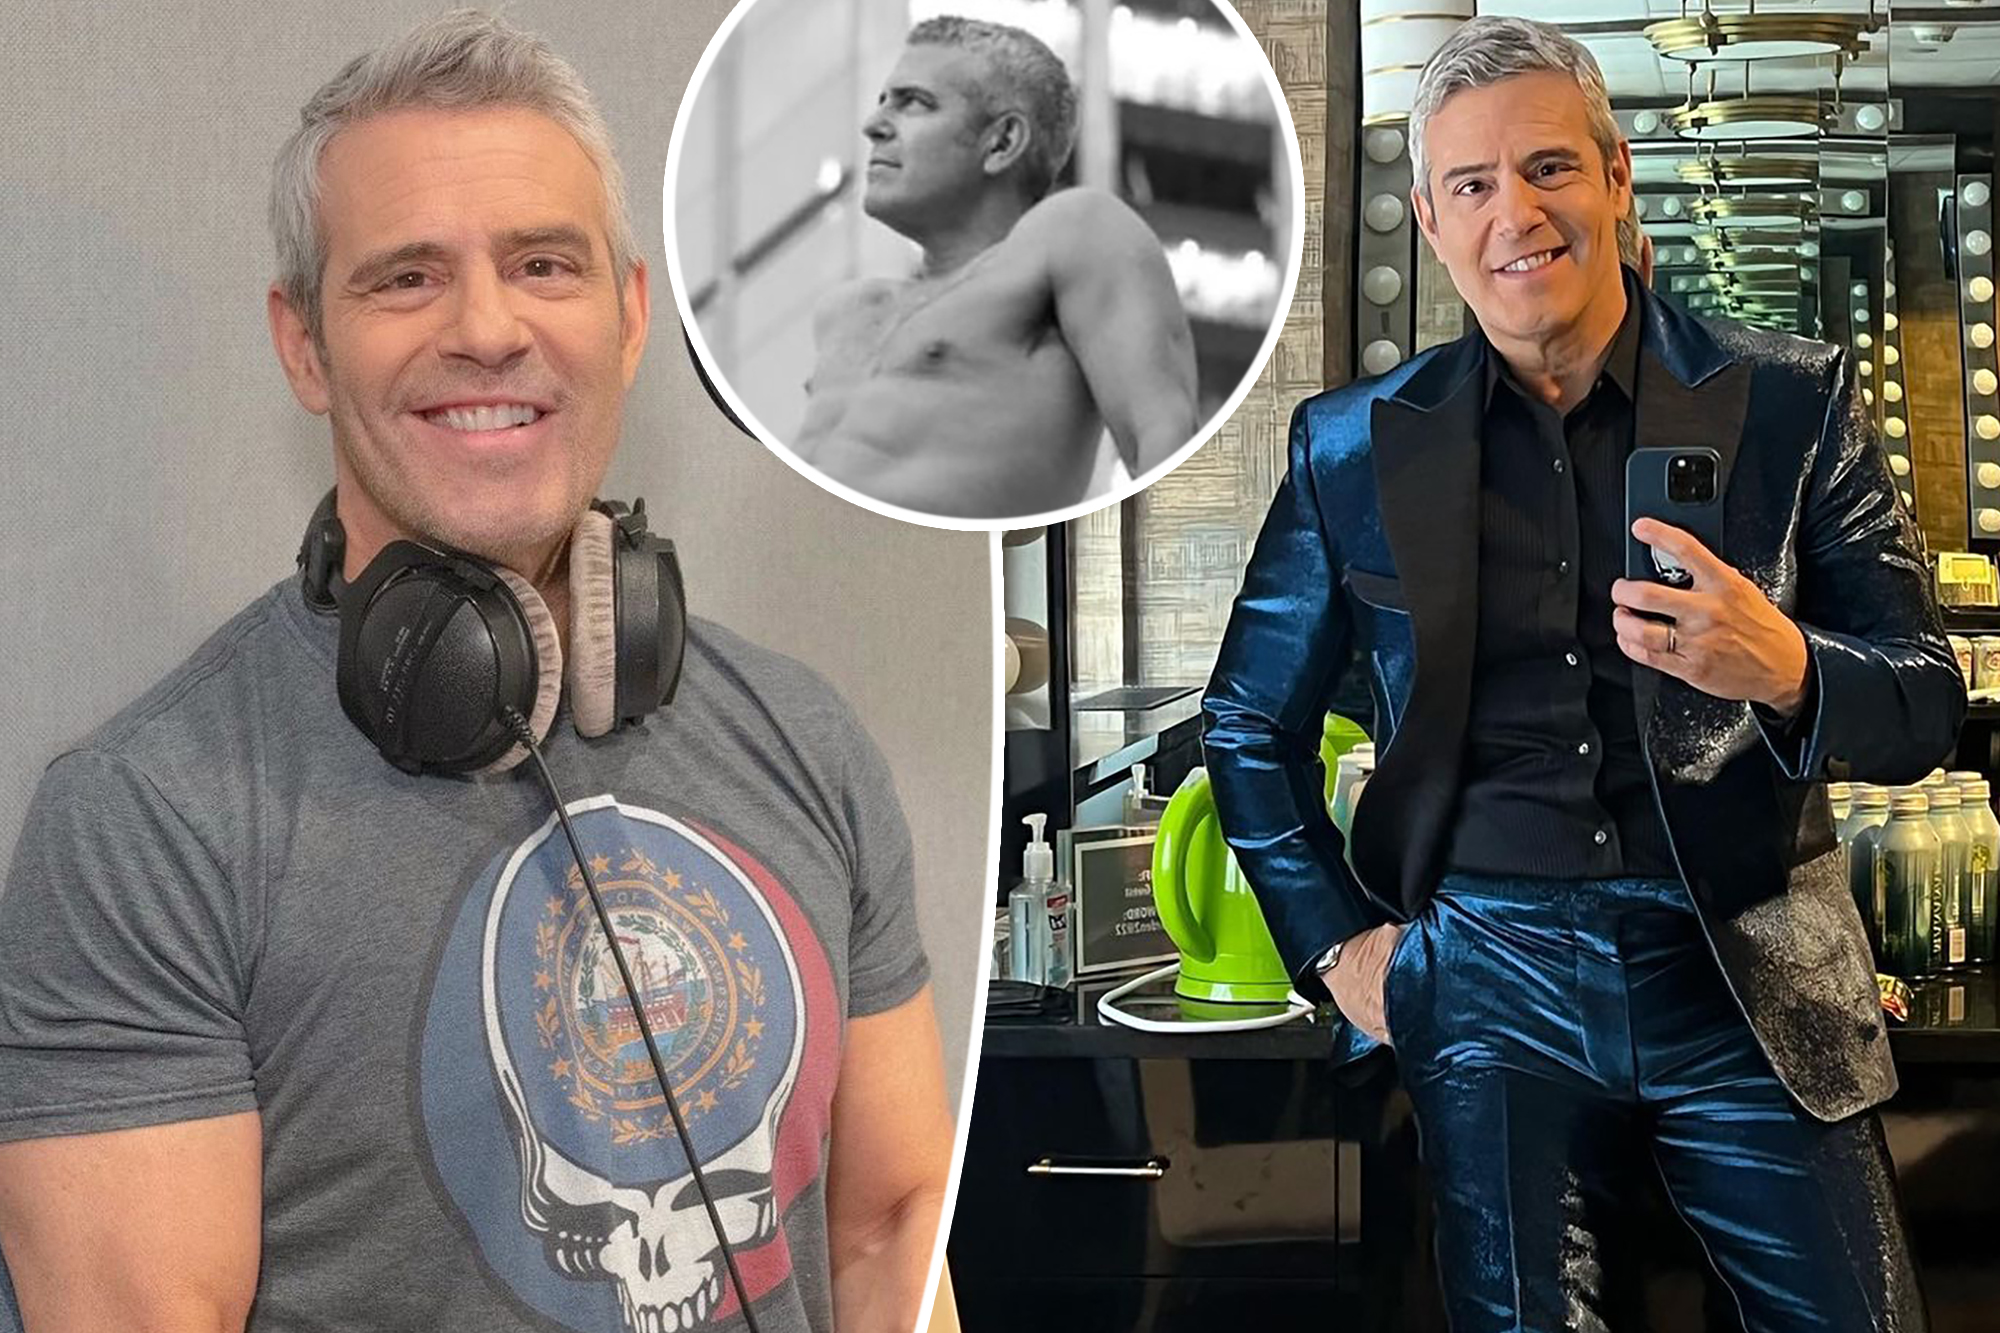 alana koch recommends andy cohen nudes pic